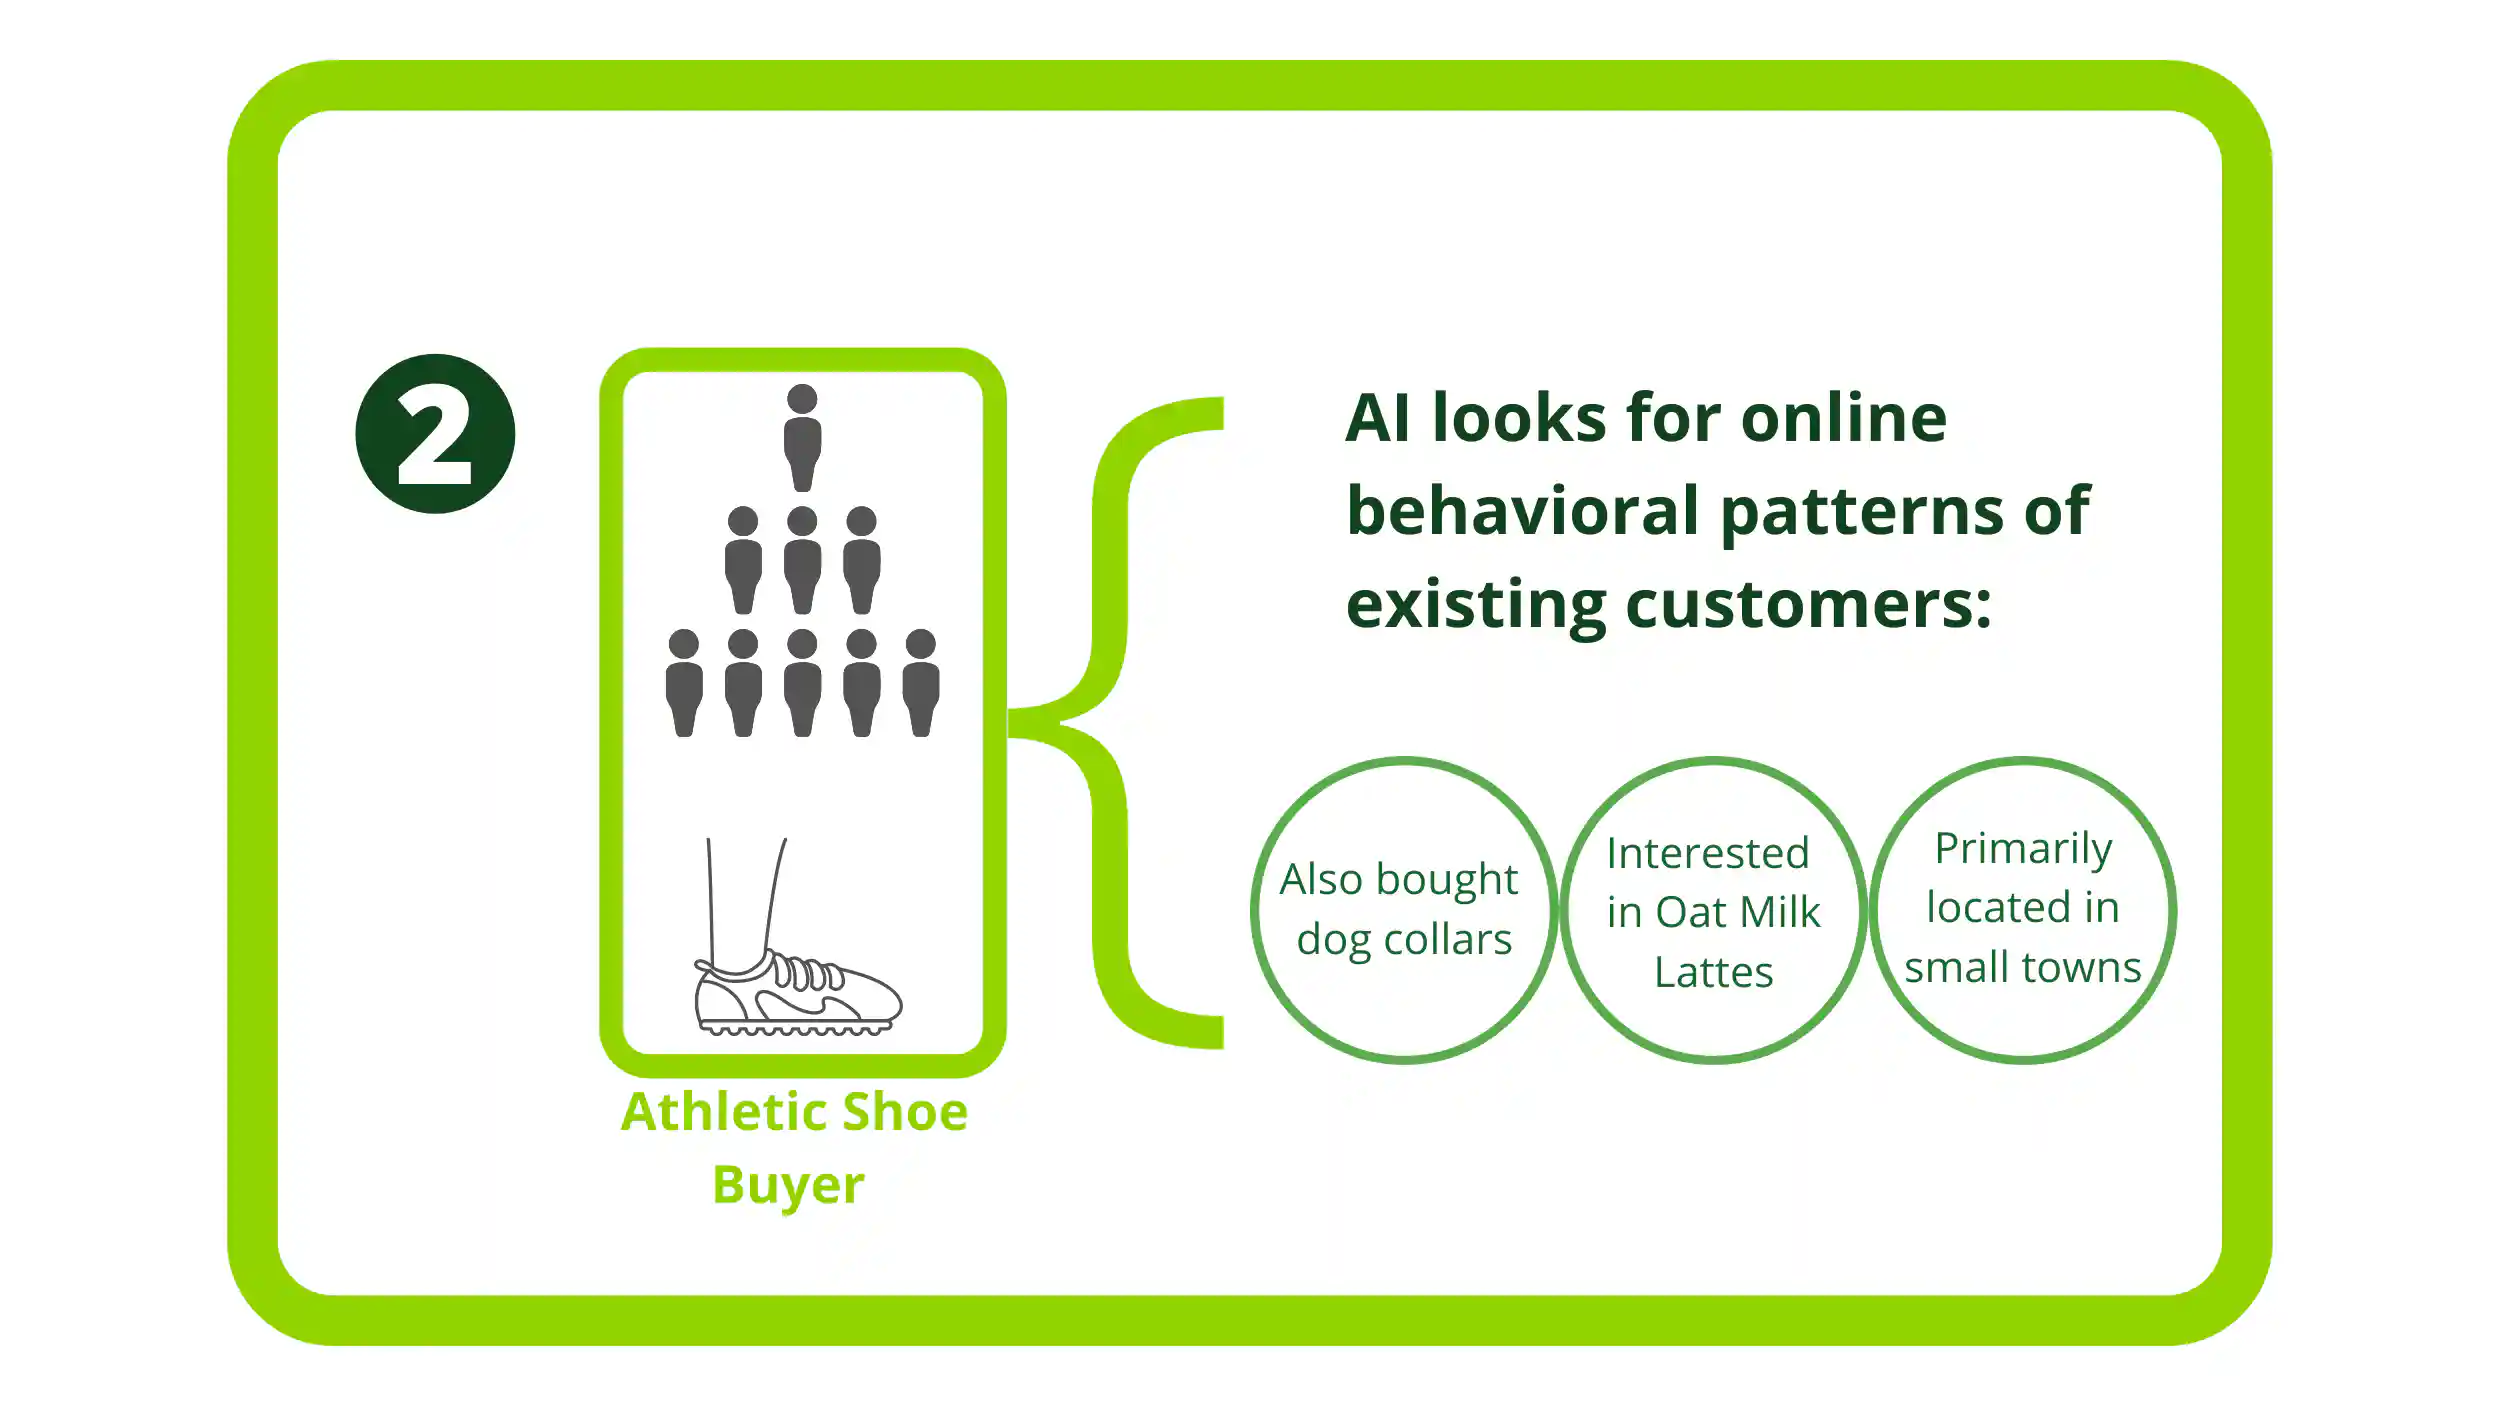 AI looks for online behavioral patterns of existing customers for athletic shoe buyers